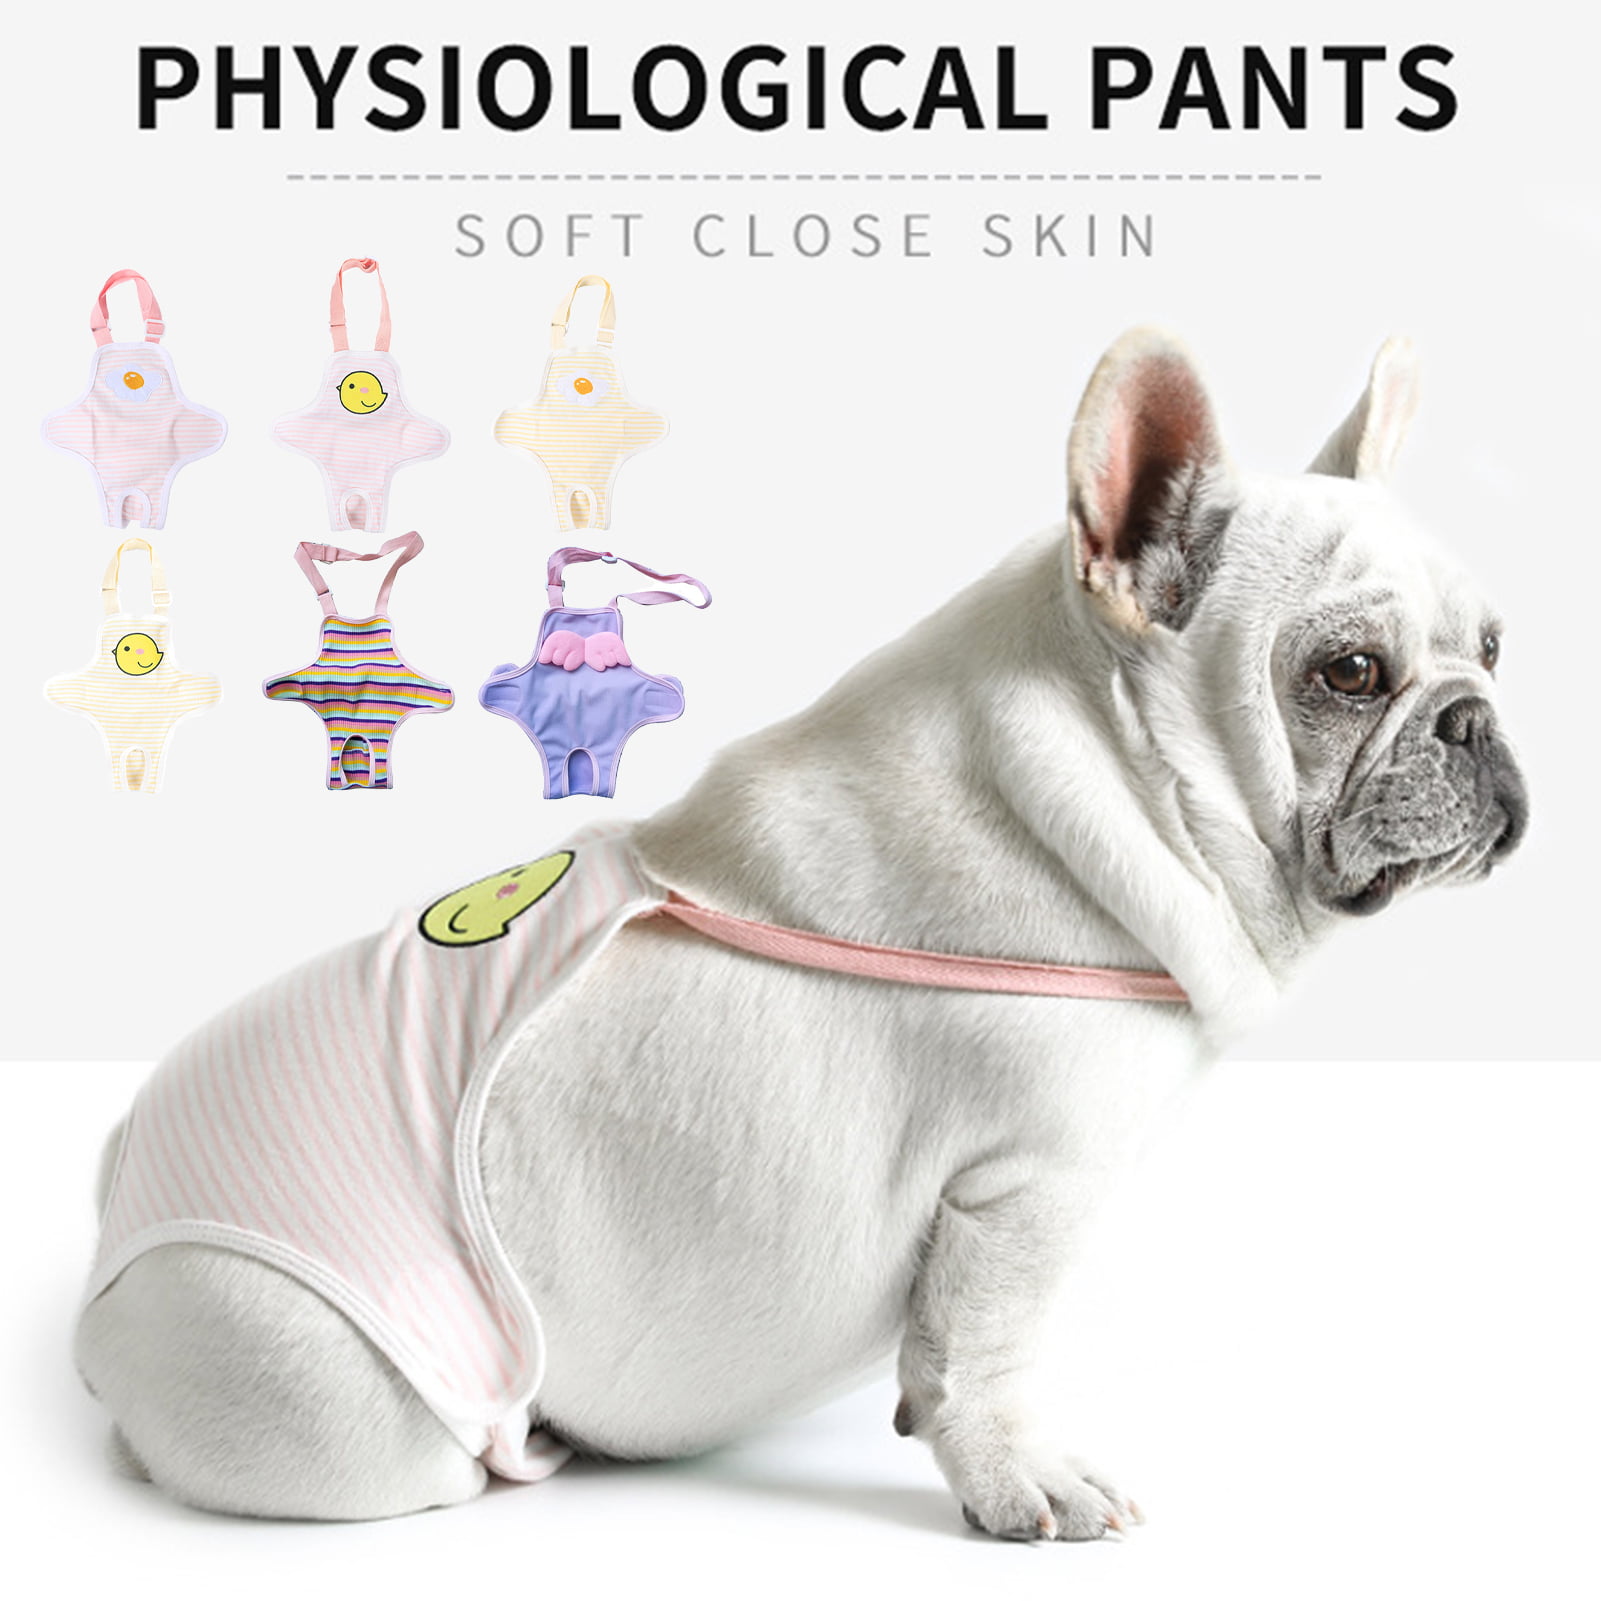 XS, Black DogLemi Male Dog Physiological Belt Male Dog Physiological Belt Prevent Harassment Dog Diapers Protect Belly Teddy Golden Hair Waterproof Underpants pet Sanitary Pants